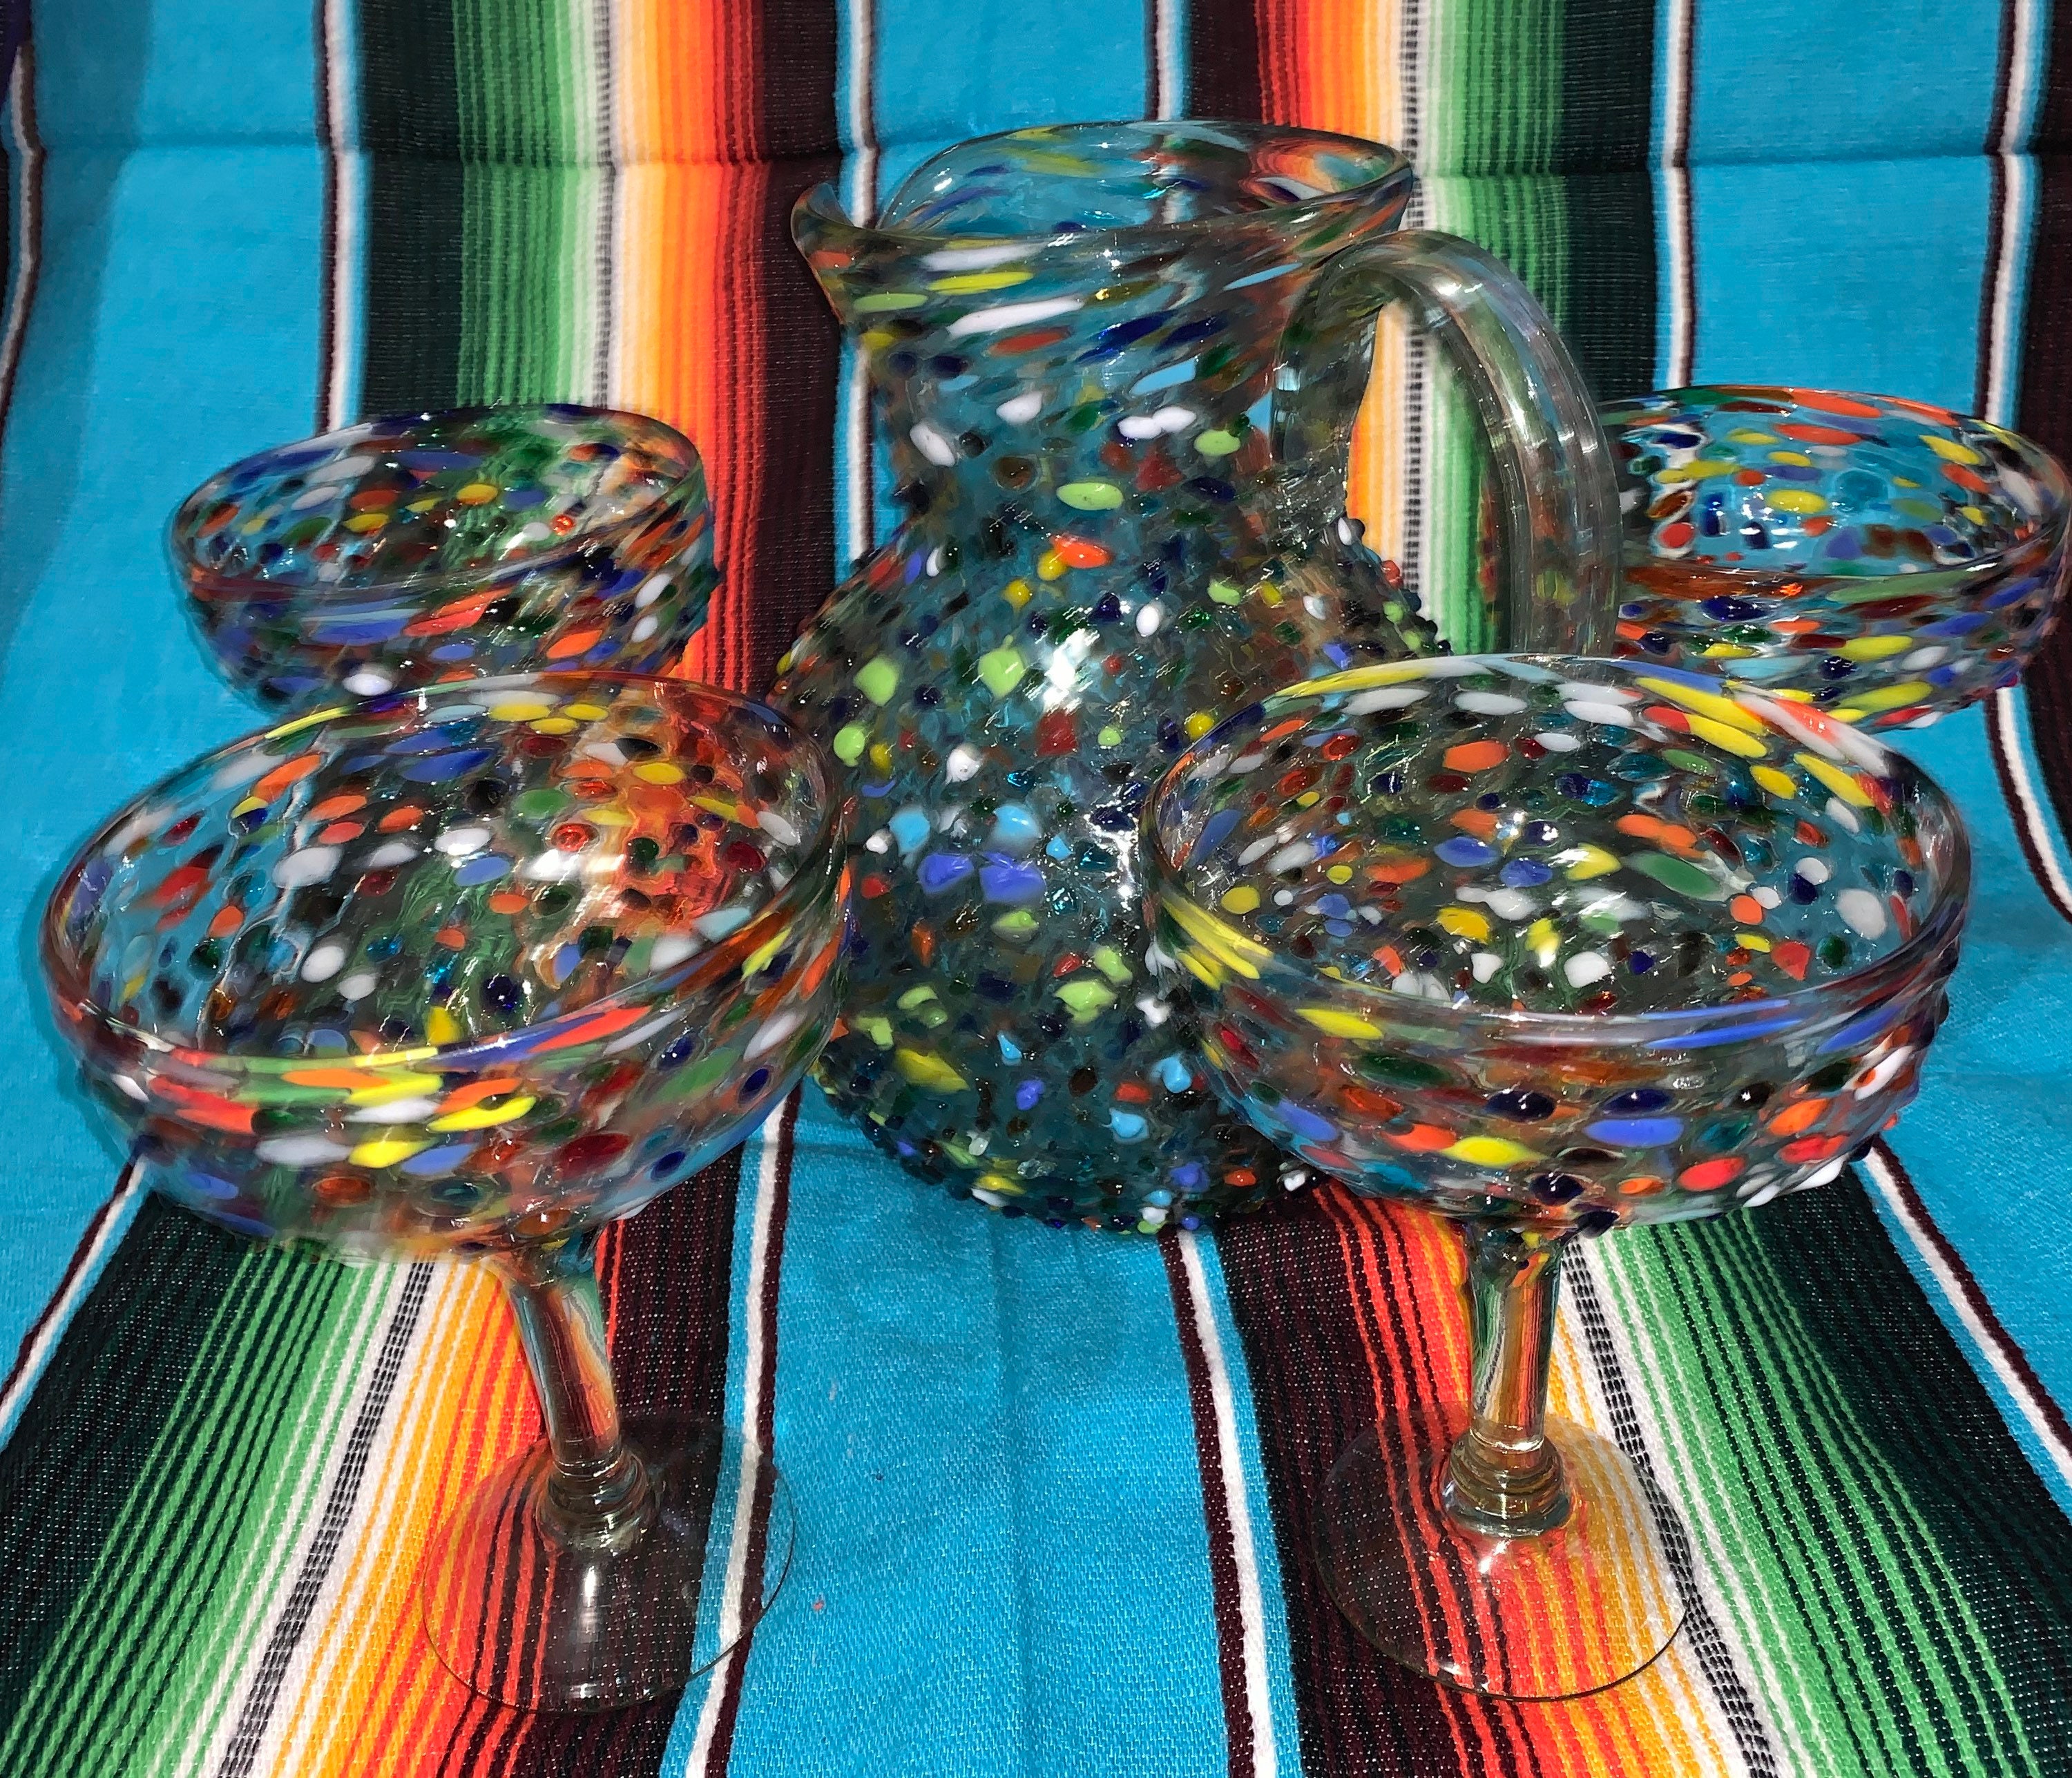 Stained Glass Margarita Glasses 2 Piece Bar Ware Set 7.75 Tall